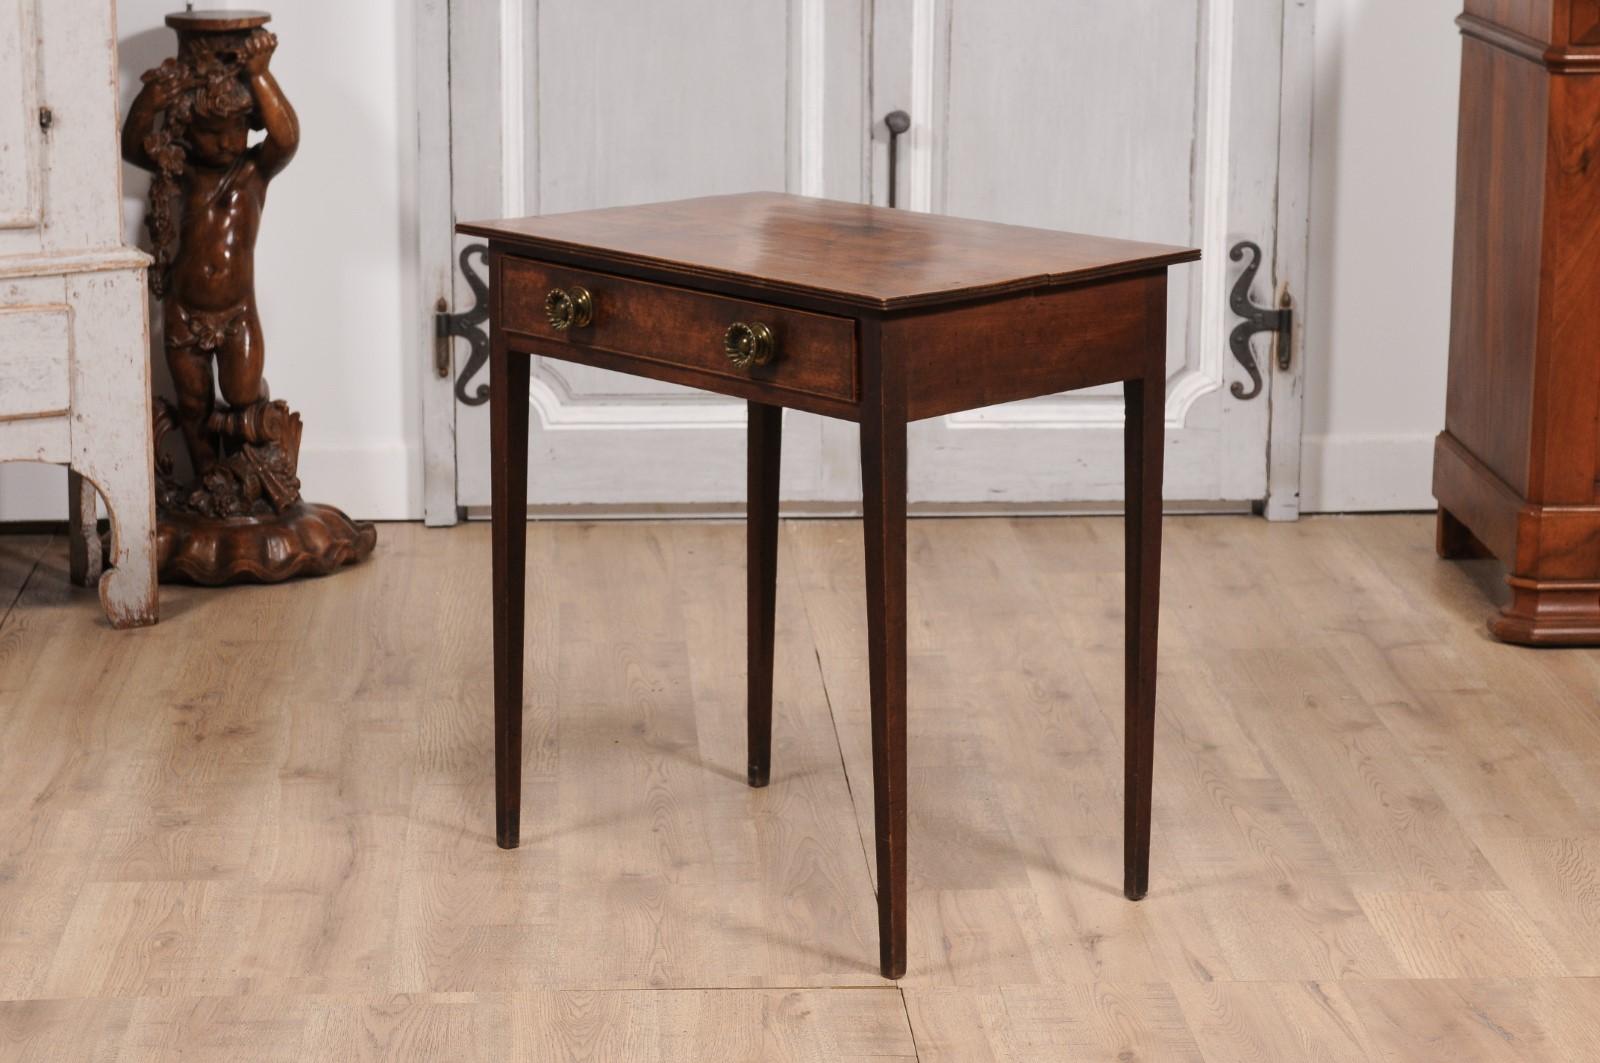 English Georgian Period 18th Century Fruitwood Side Table with Single Drawer For Sale 7